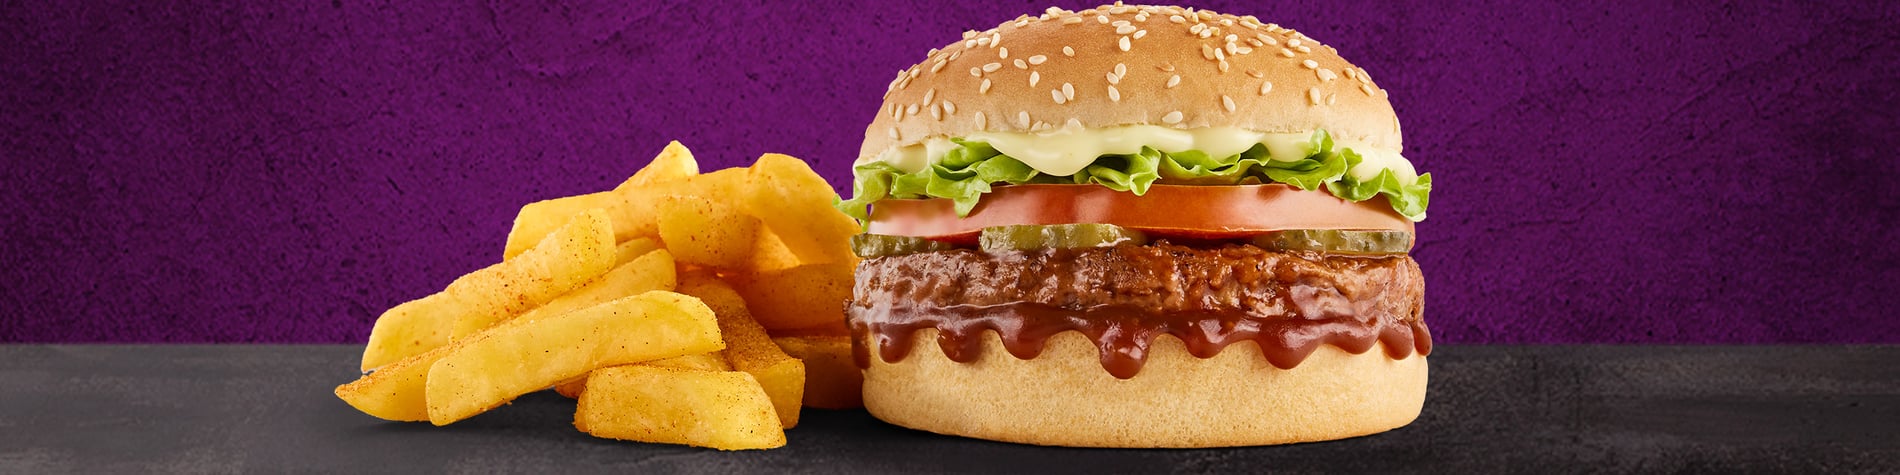 The NEW Mo’MjojoTM Burger Meal from Steers® Shell Diner Umnini North. 2 Flame-Grilled pure beef patties, pineapple, macon, tomato, lettuce, and small Famous Hand-Cut Chips, on a purple background.